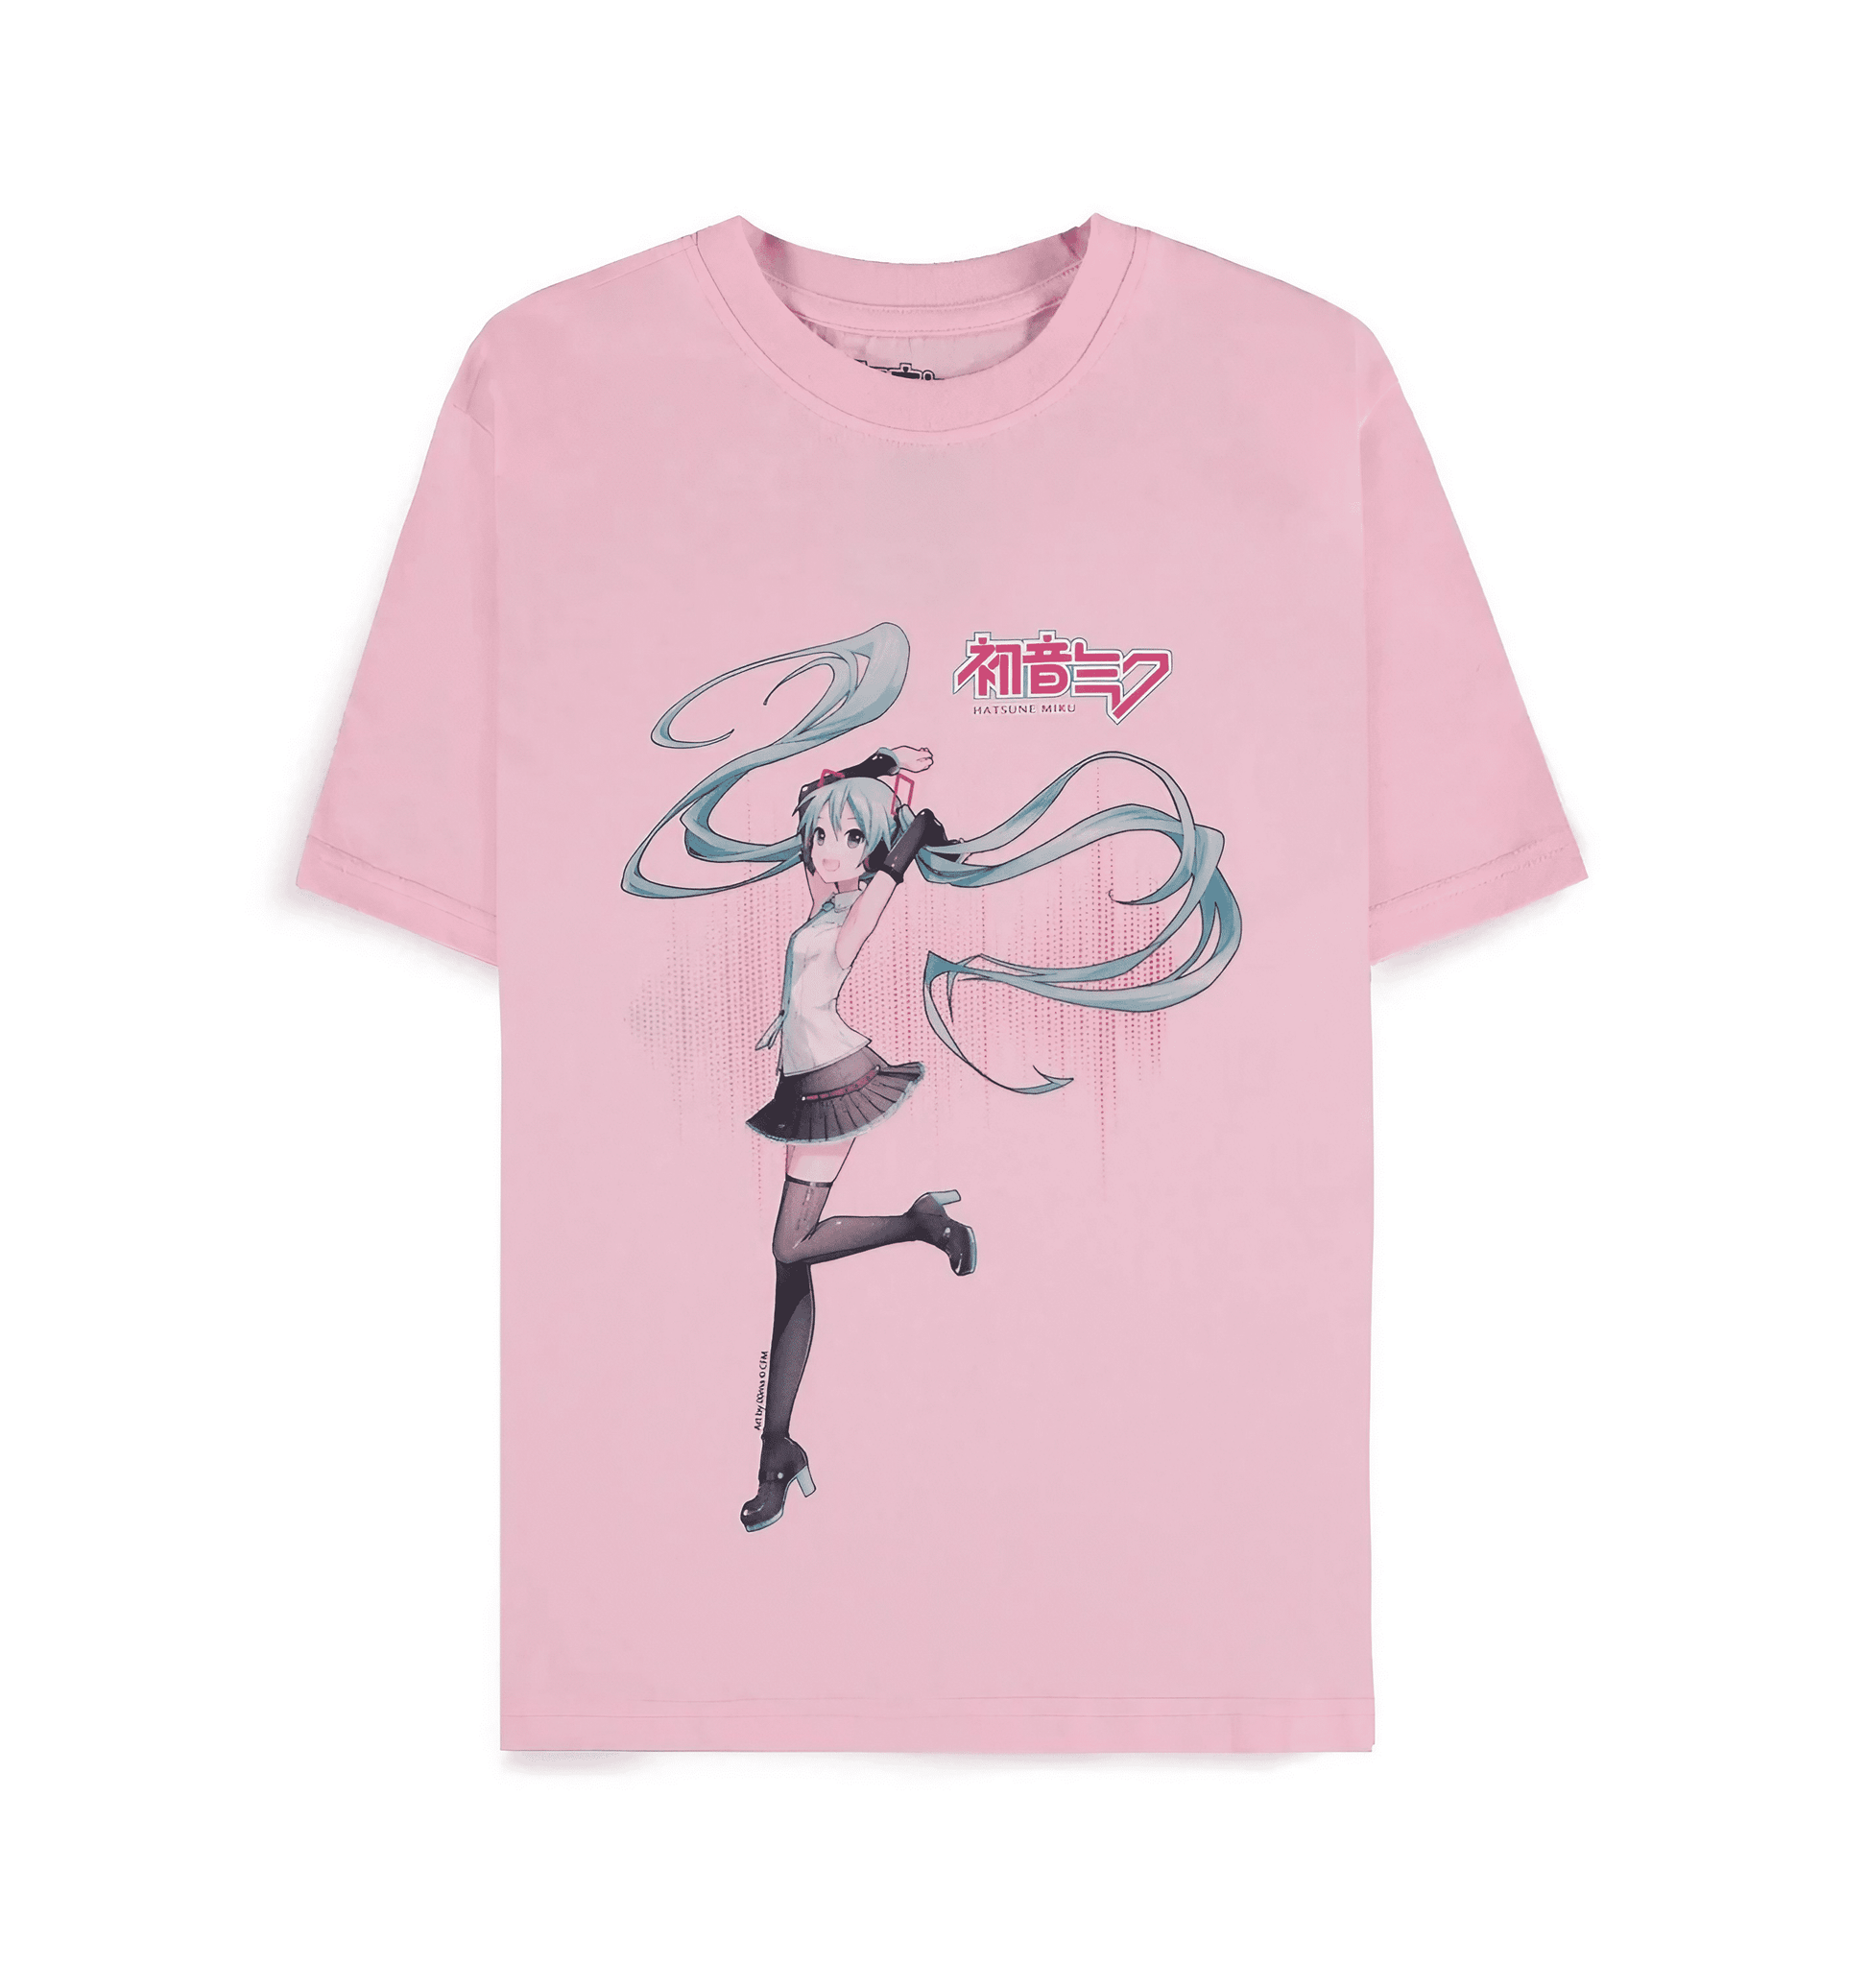 Close-up of a pink Hatsune Miku T-shirt with character in sailor suit design